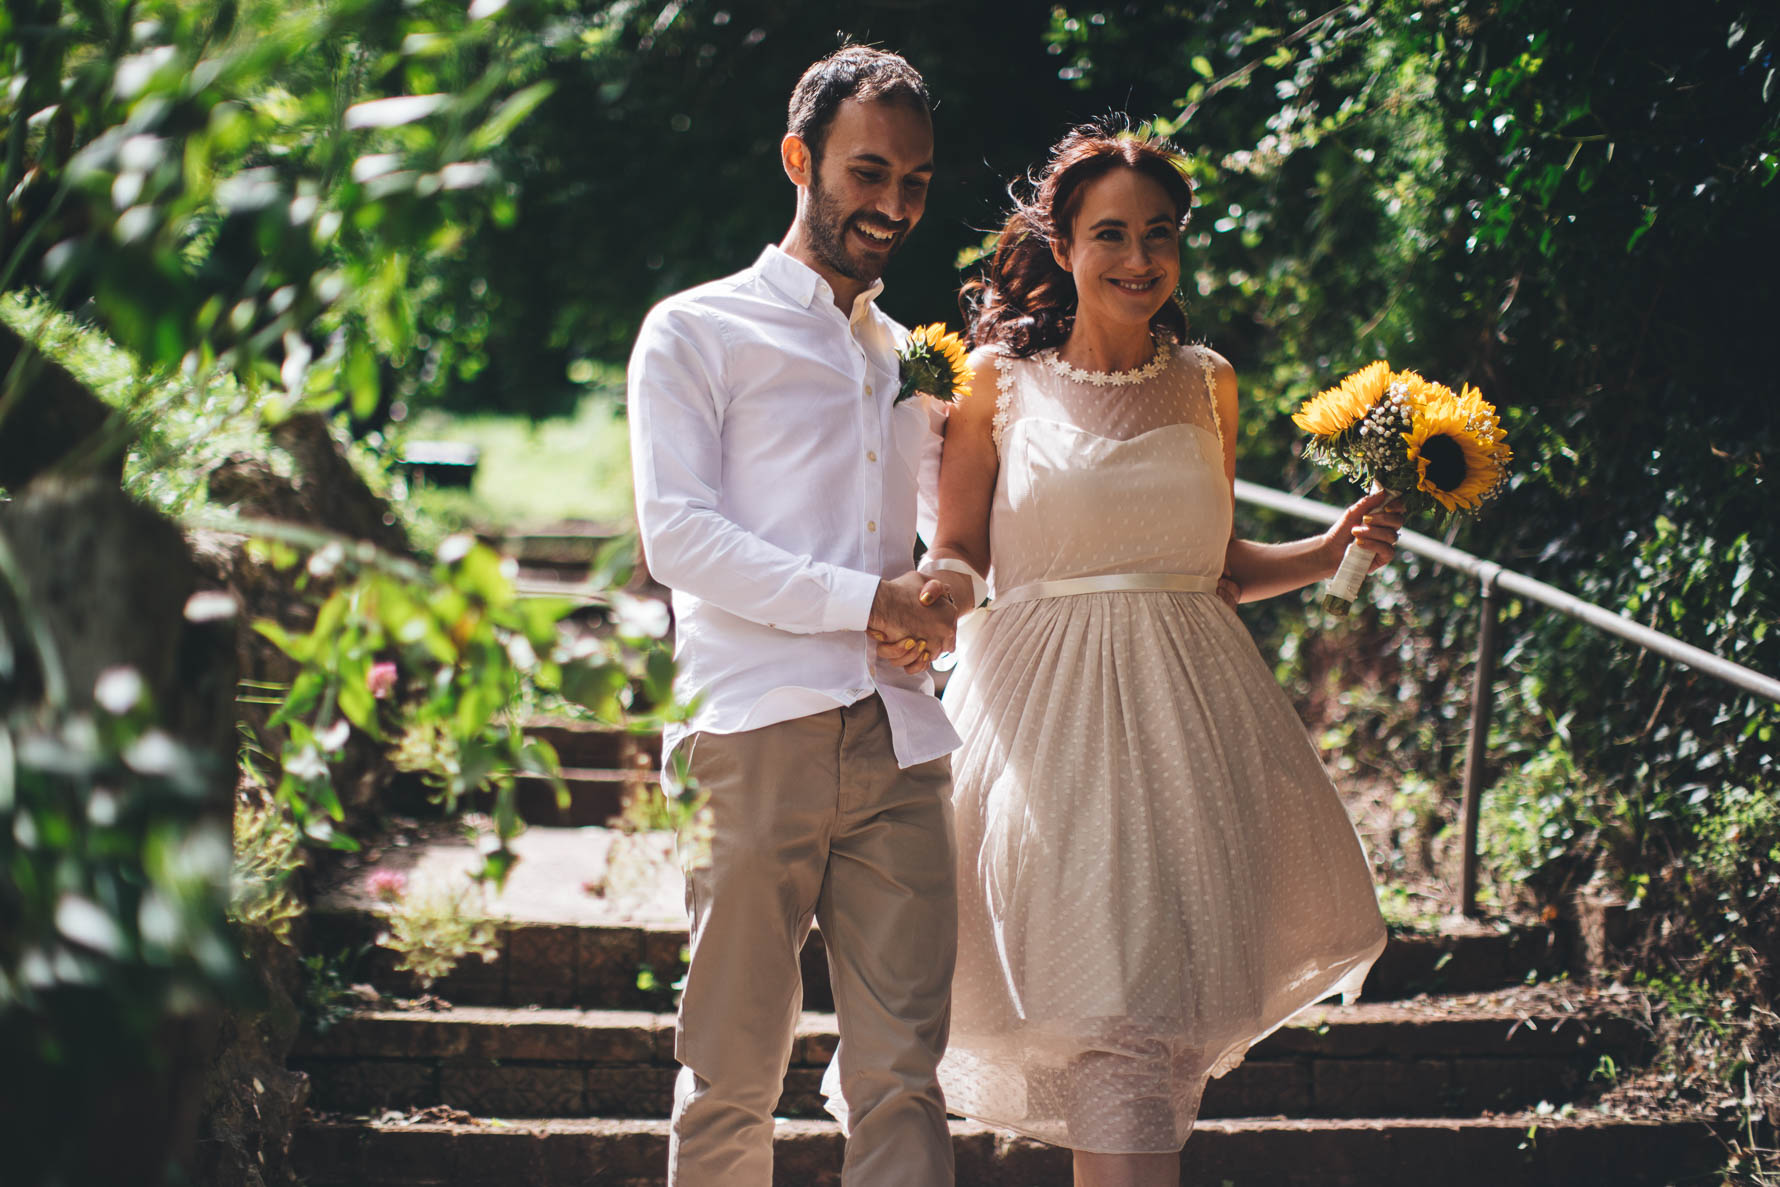 Bride and groom holding hands as the walk down some stone steps in a garden. The bride is holding a bouquet of sunflowers and the groom has a sunflower buttonhole